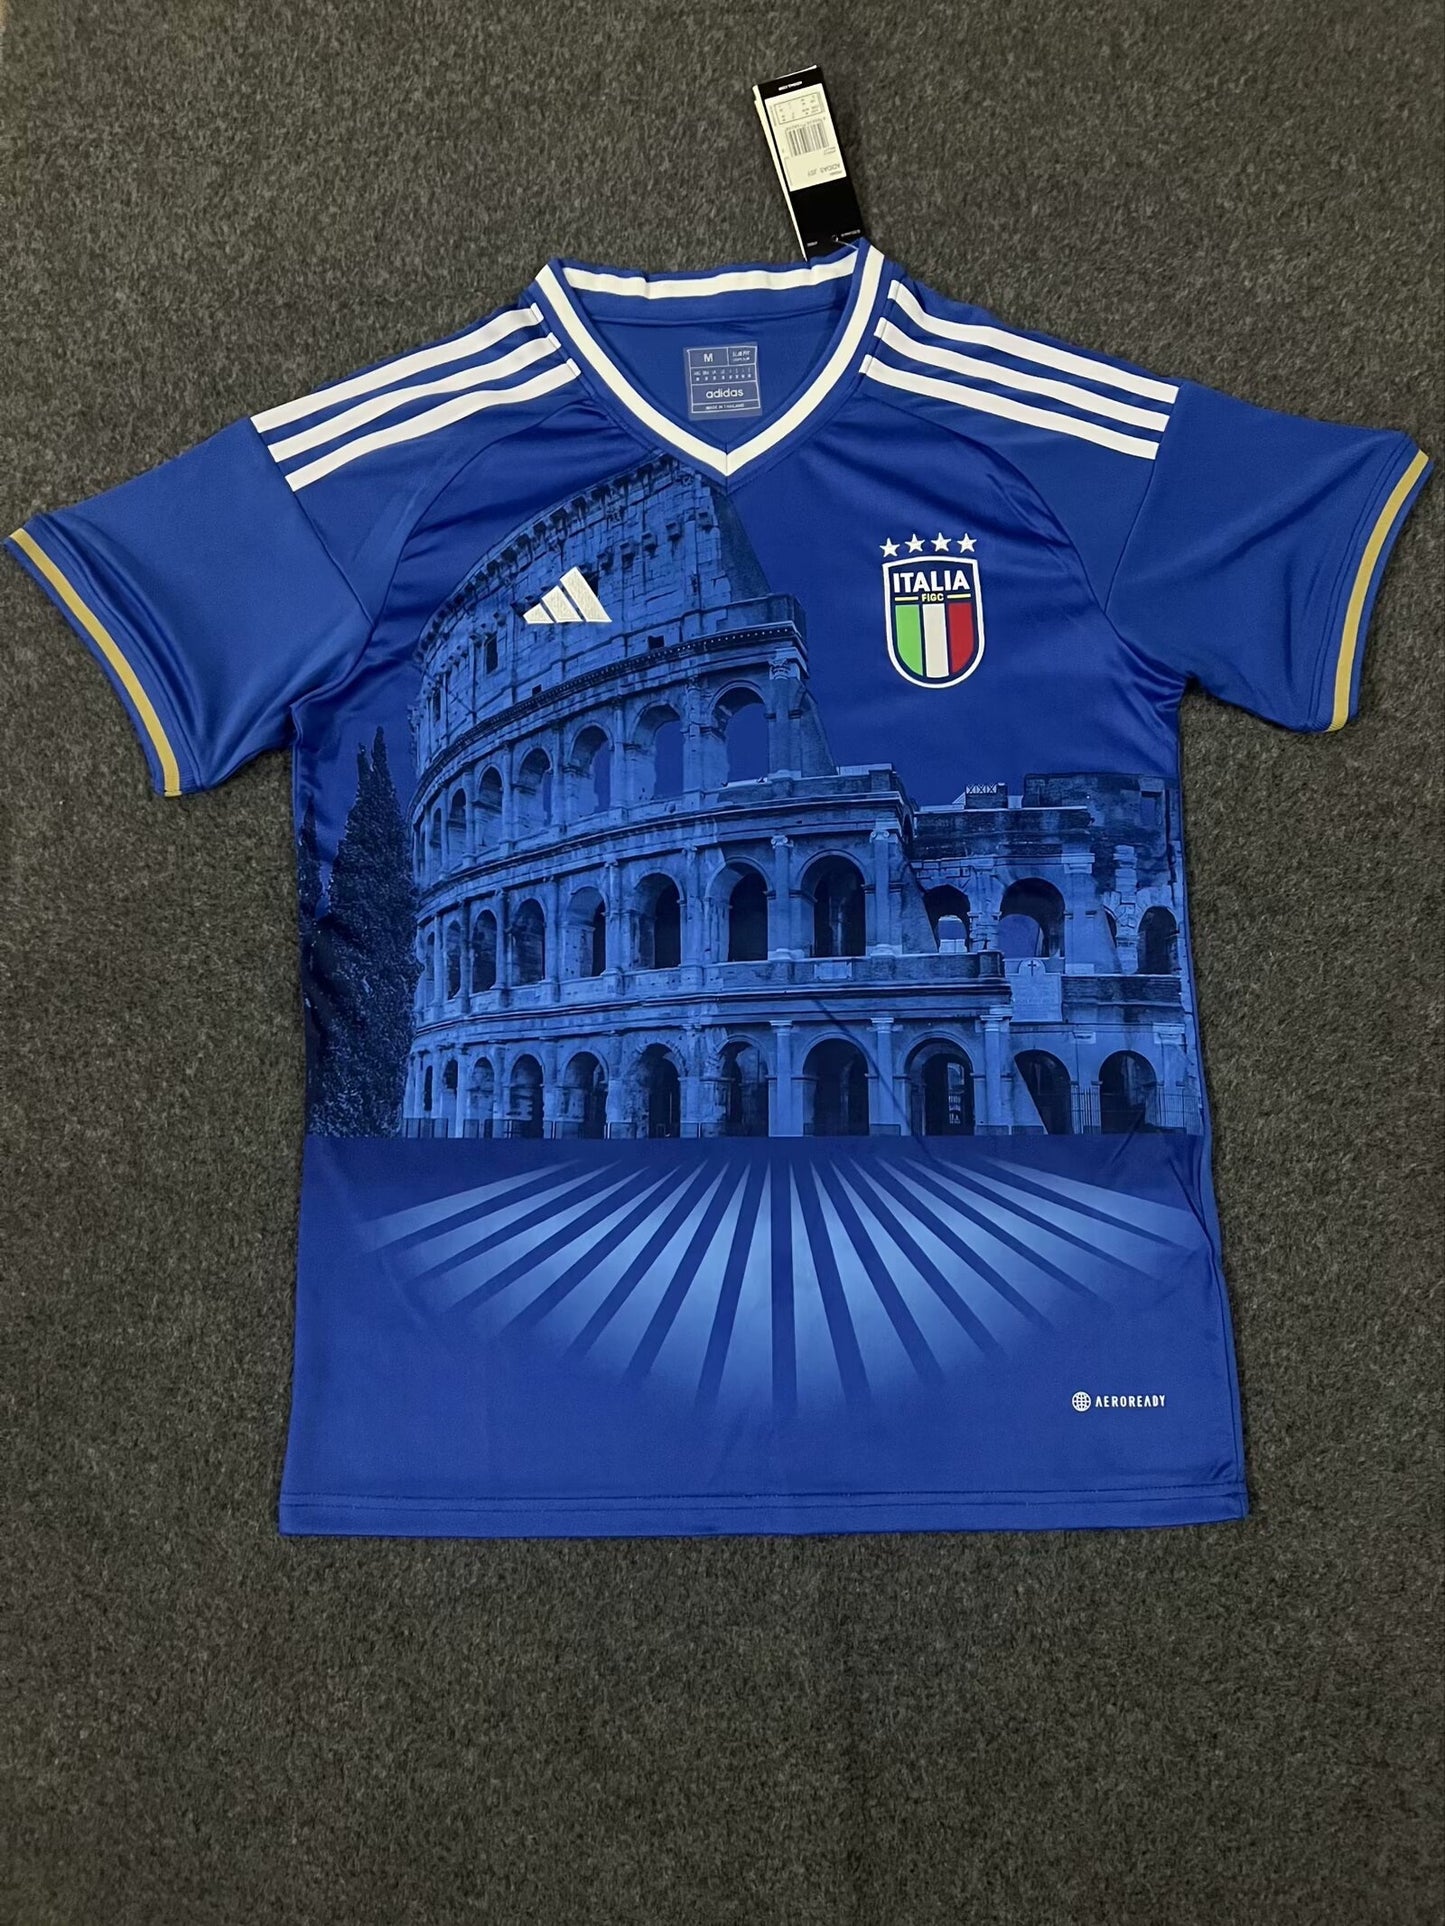 Versace Italy National Team ‘Colosseum’ Authentic Adidas Fan Version Jersey - Blue